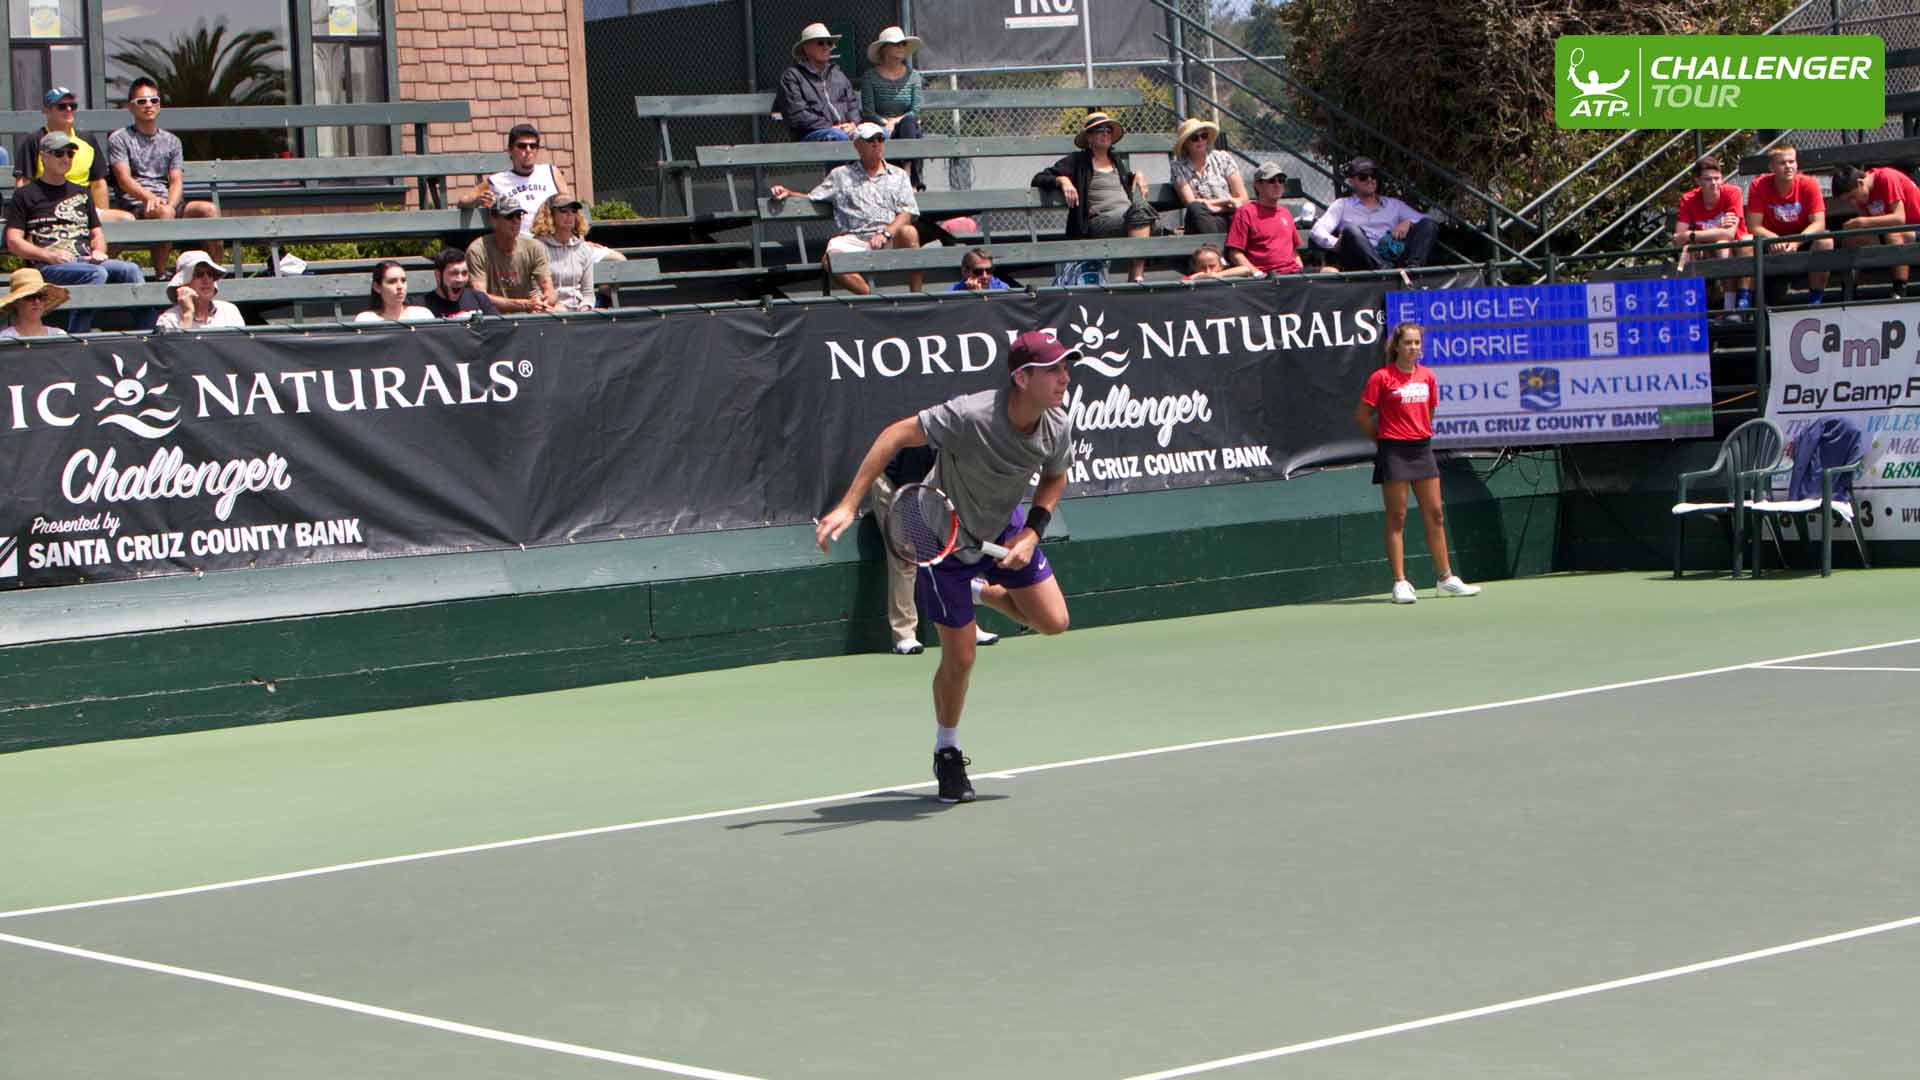 Cameron Norrie enjoys a breakthrough week at the ATP Challenger Tour event in Aptos.